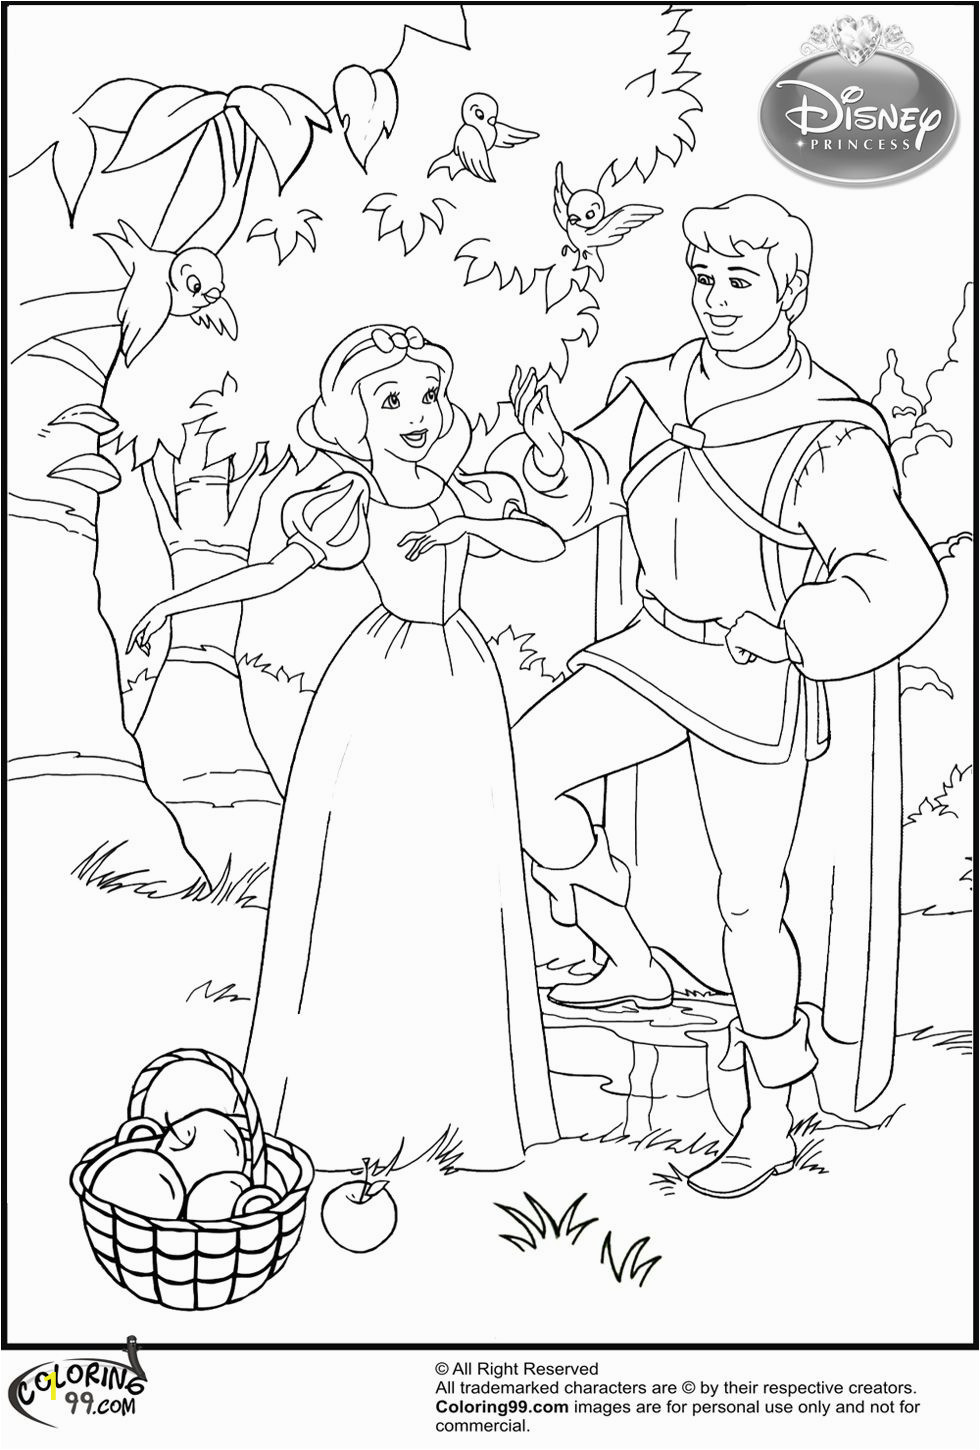 Snow White Coloring Pages Disney Pin by Michelle Jones On Disney Coloring